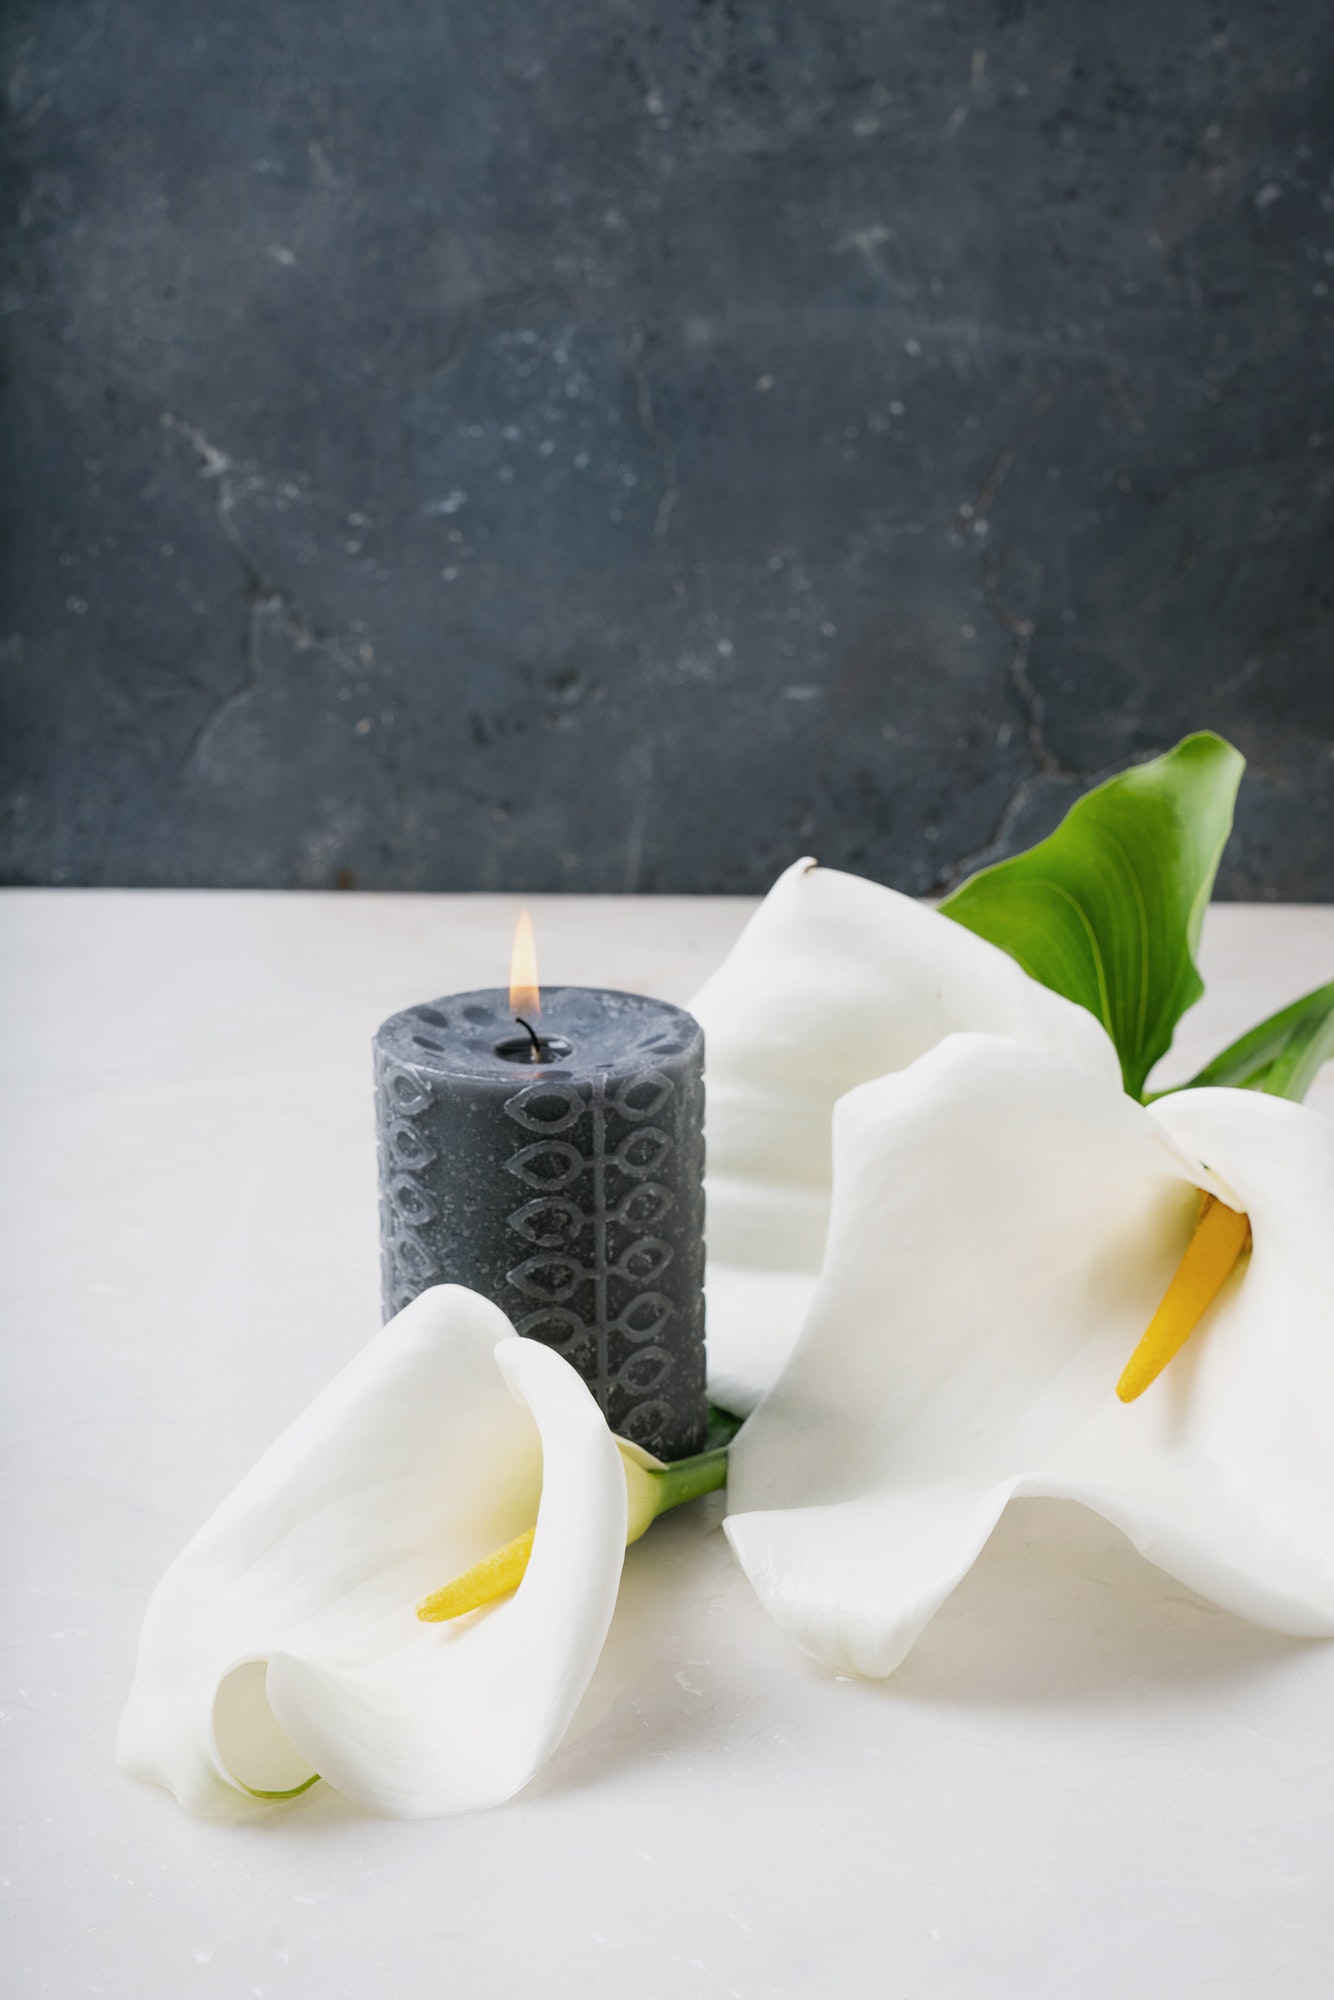 White Calla Lilly flowers with burning black candle